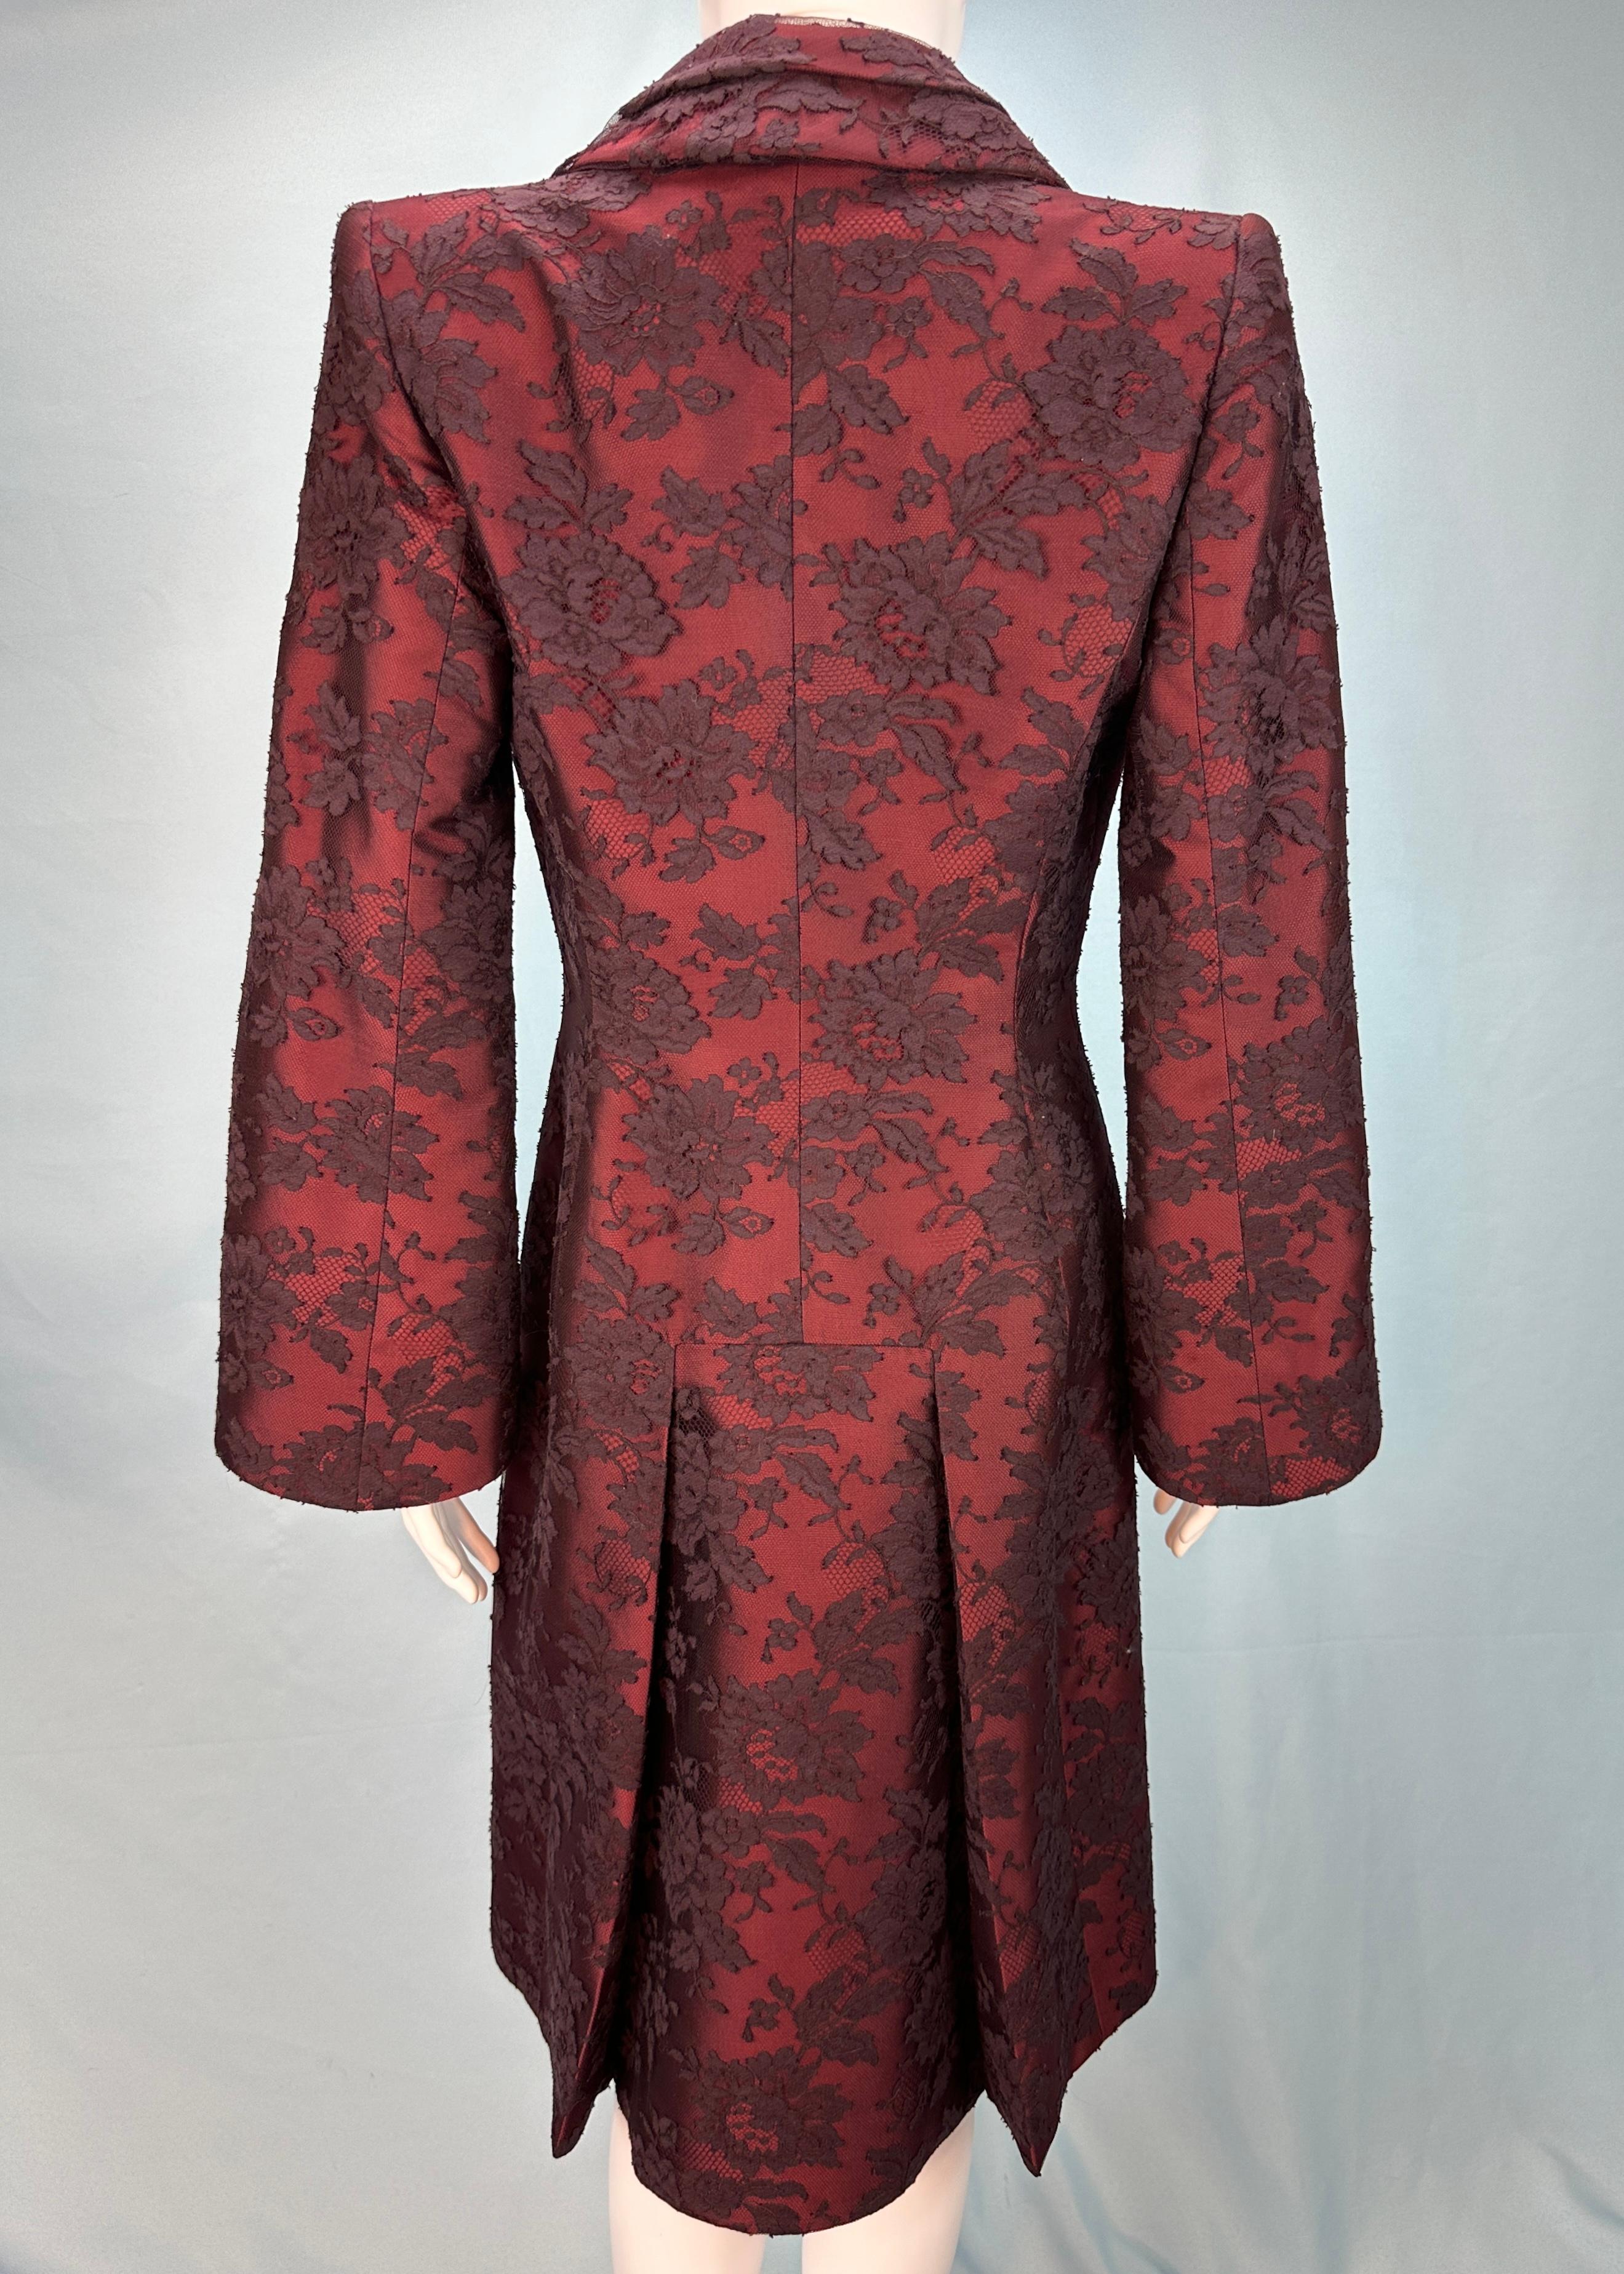 Givenchy Couture 
by Alexander McQueen
Fall 1998

Deep red silk & lace overlay structured jacket
Flared sleeves
Collared
Padded shoulder
Pleated back
Single button

100% silk jacket
70% polyester, 30% nylon lace
100% acetate lining

Size EU 38 / UK